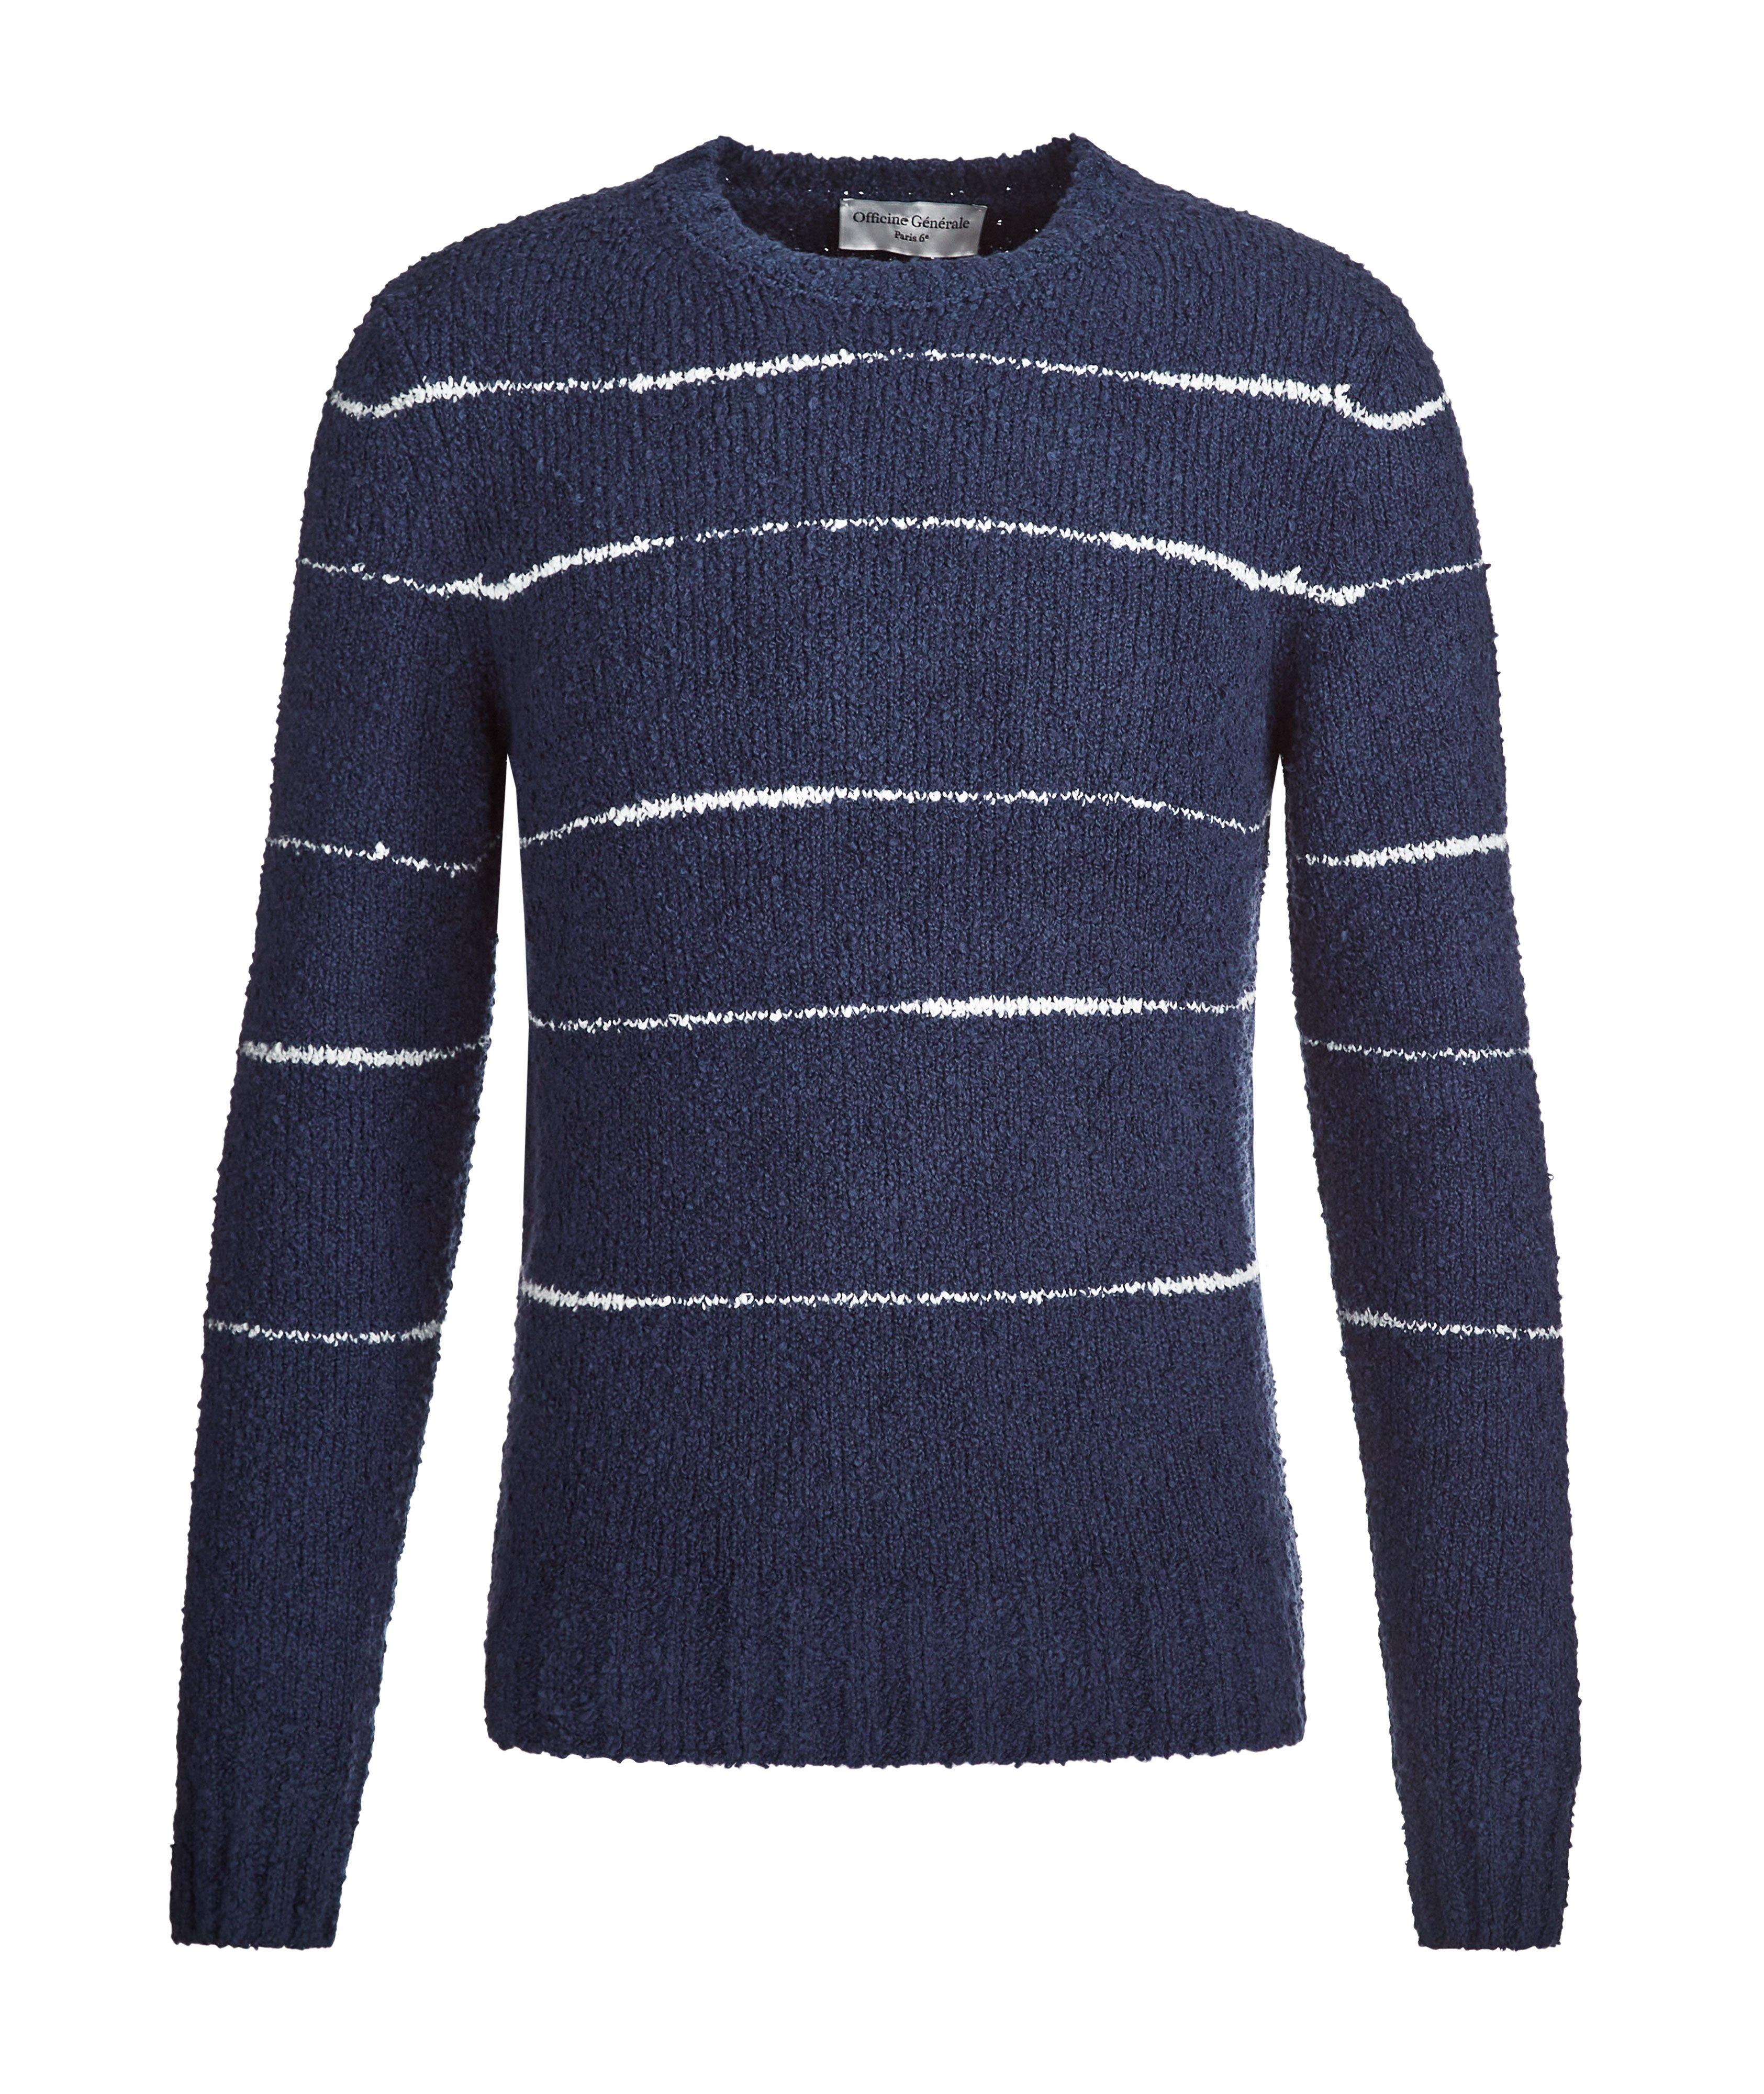 Officine Générale Marco Striped Cotton-Blend Sweater | Sweaters & Knits ...